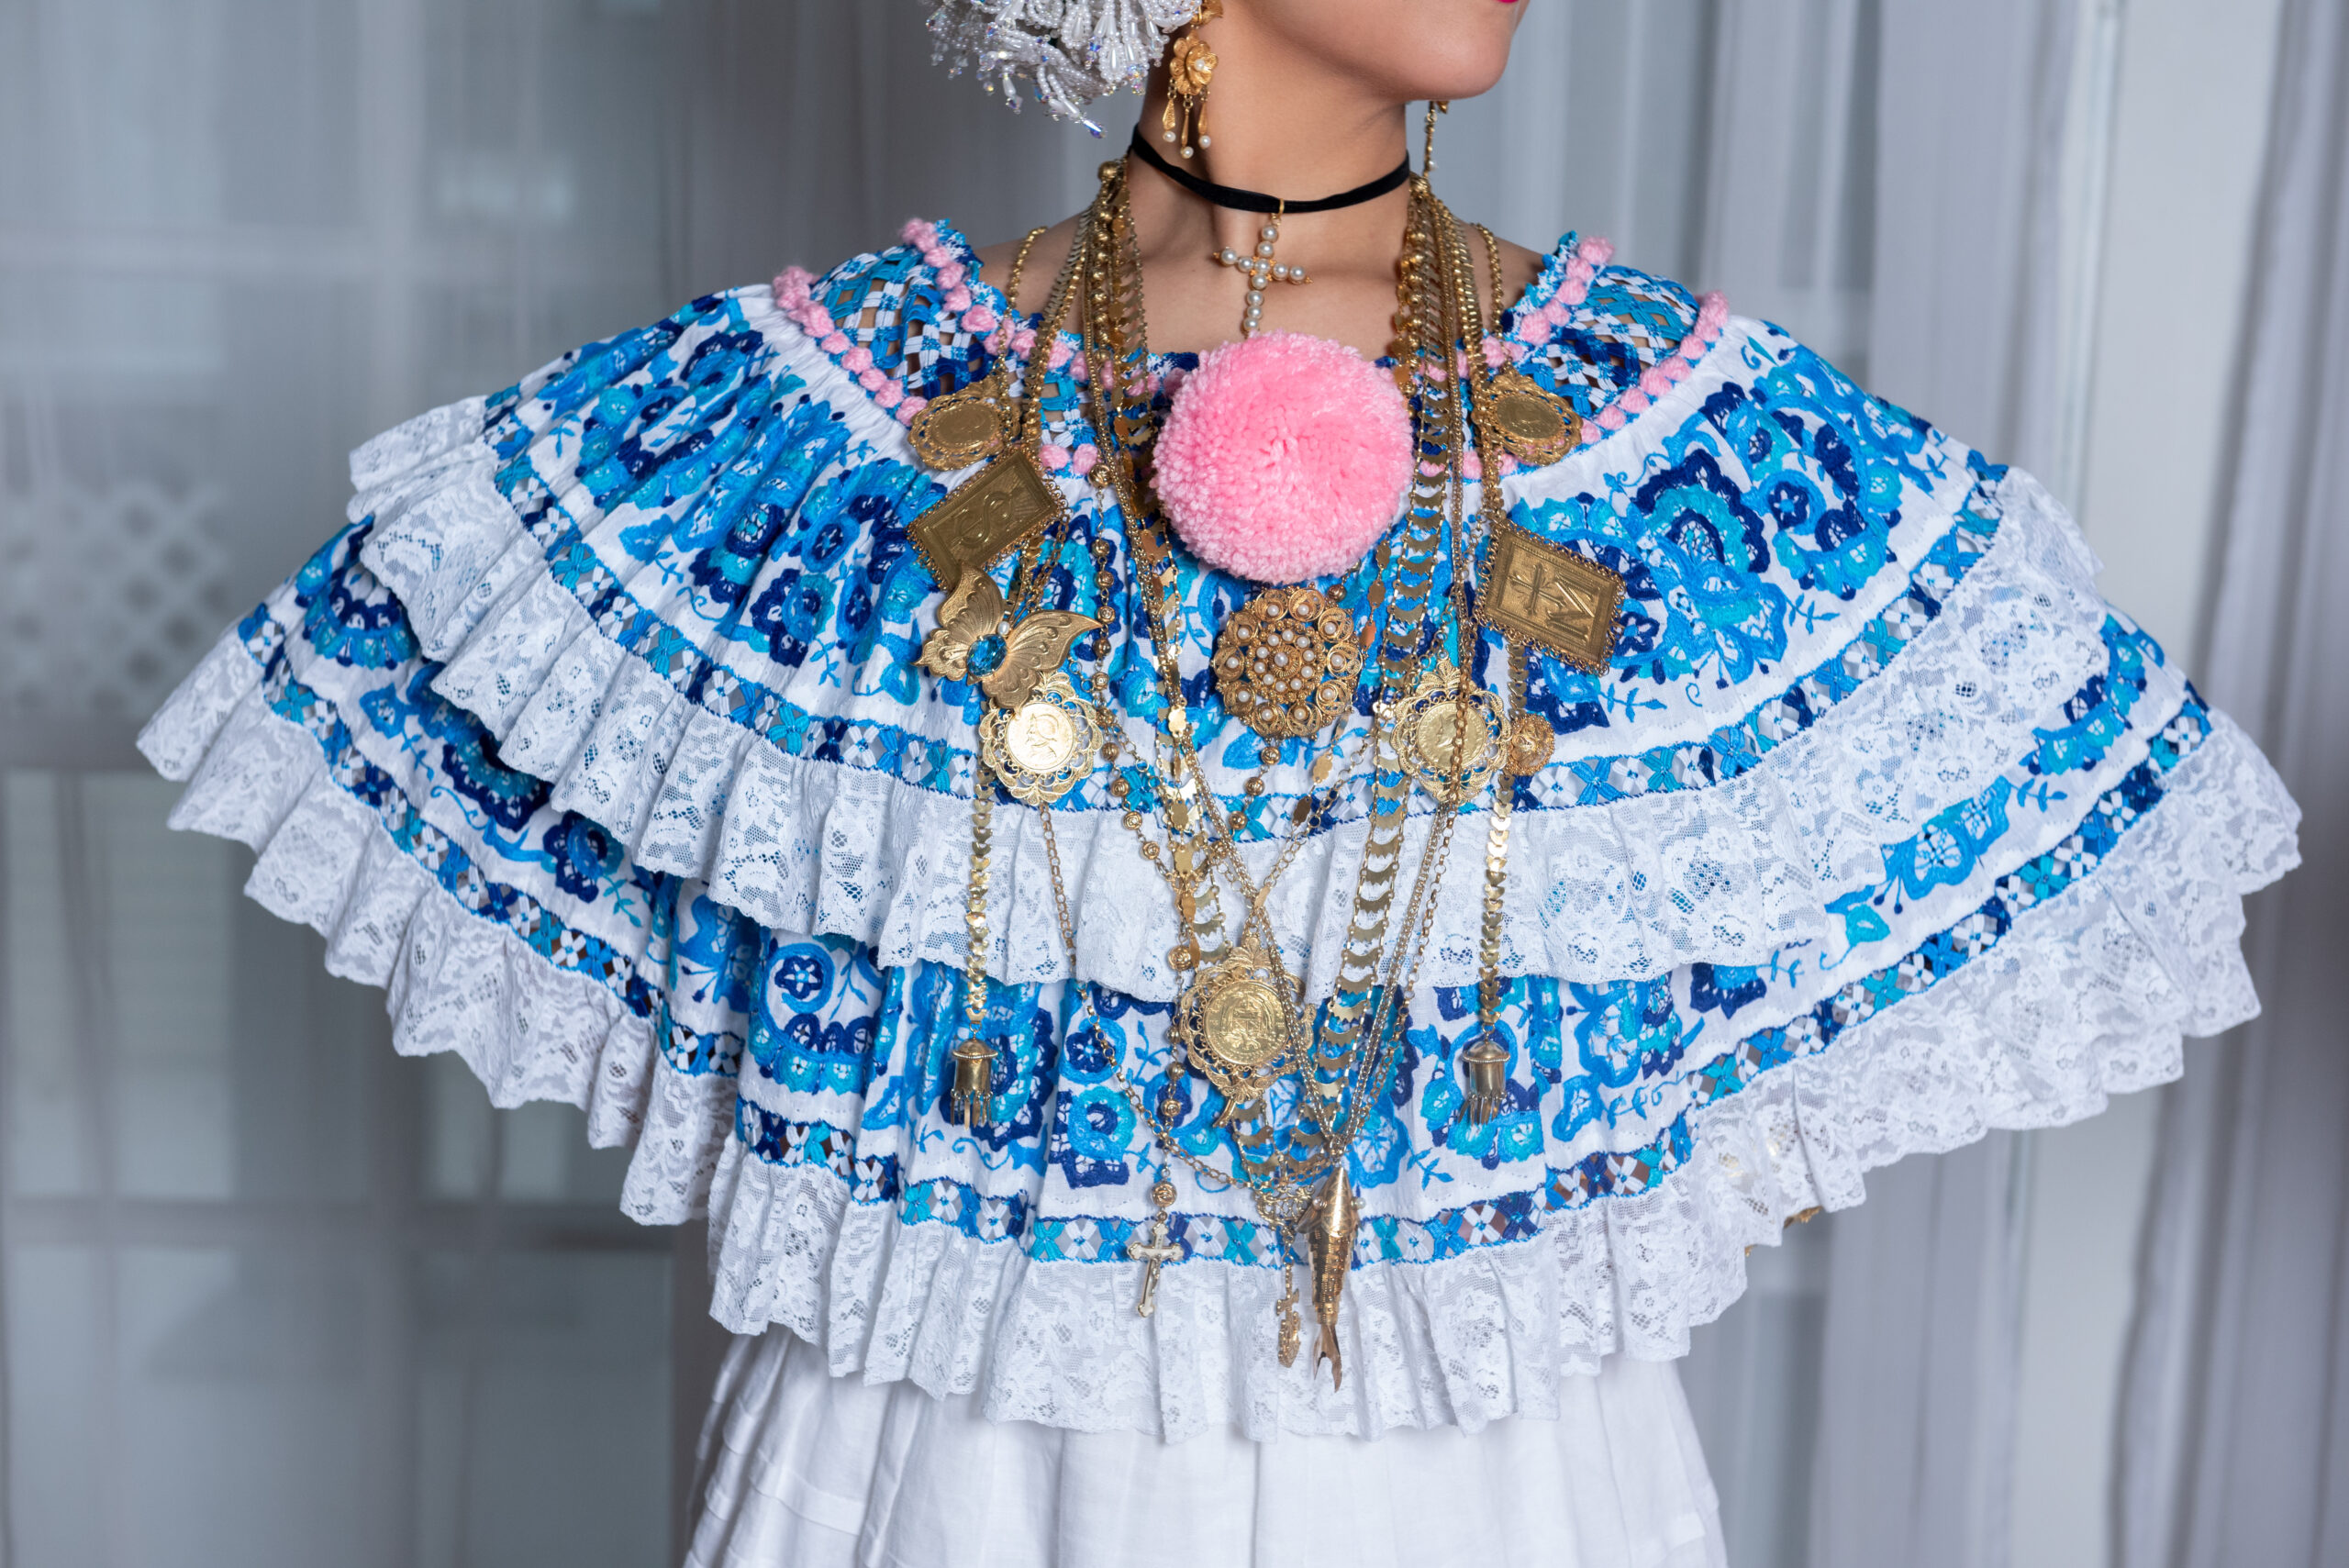 A close up shot of a woman in a blue and white embroidered blouse with pink accents. She wears various gold chains.